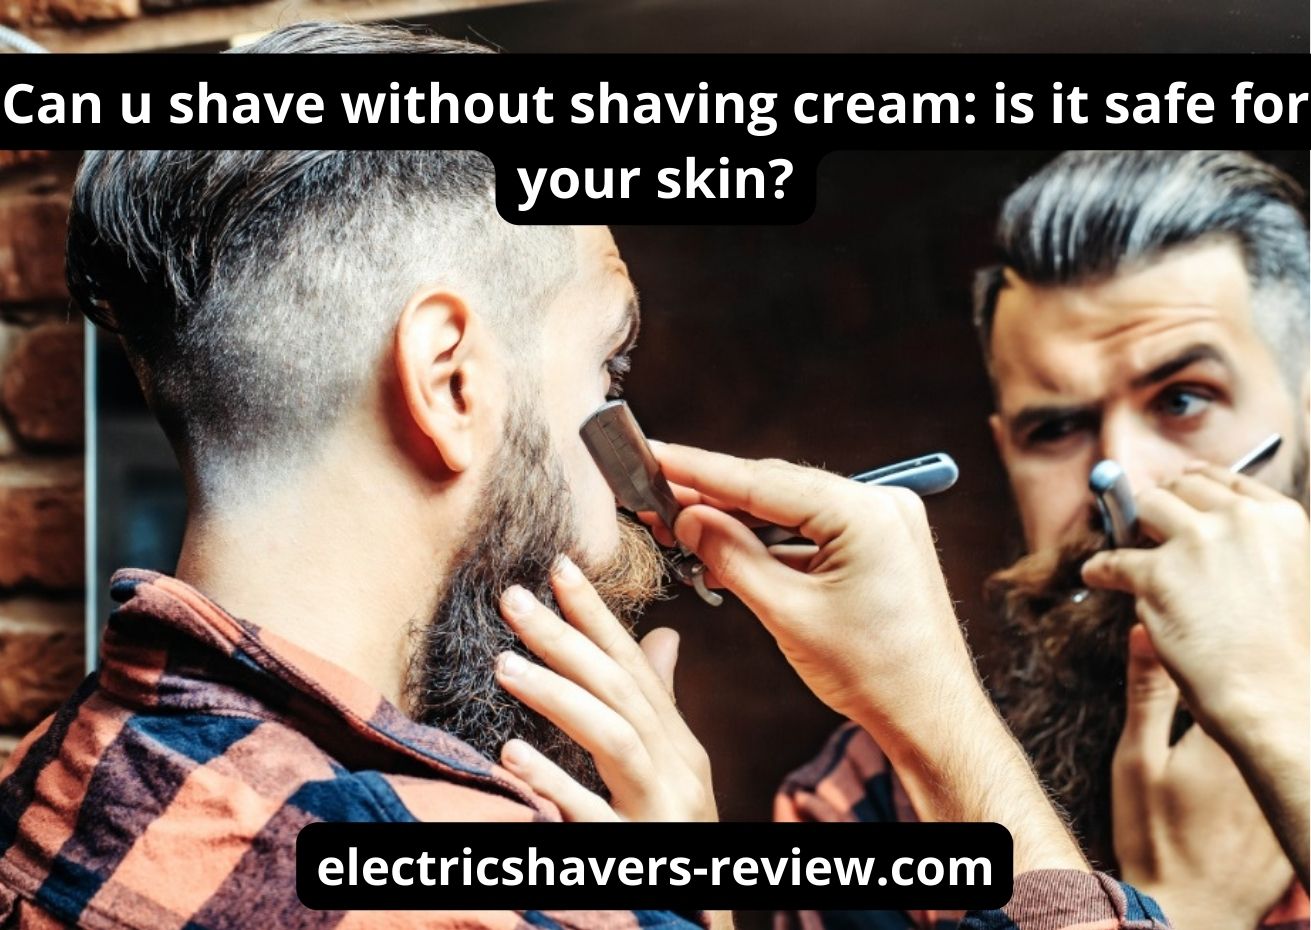 Can u shave without shaving cream? The best guide (5+ alternatives)